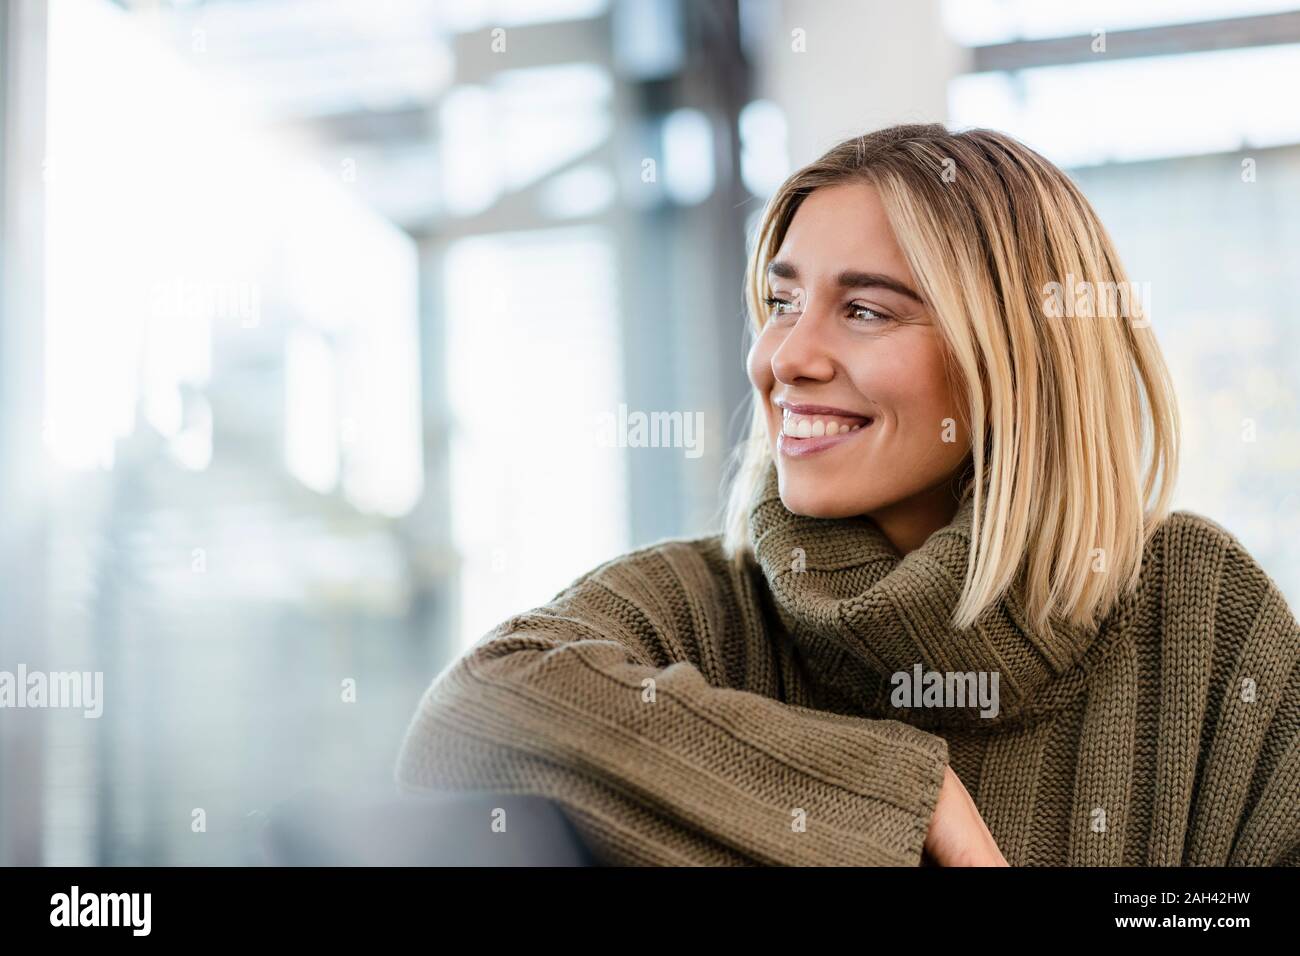 Smiling young woman sitting in waiting area looking around Stock Photo